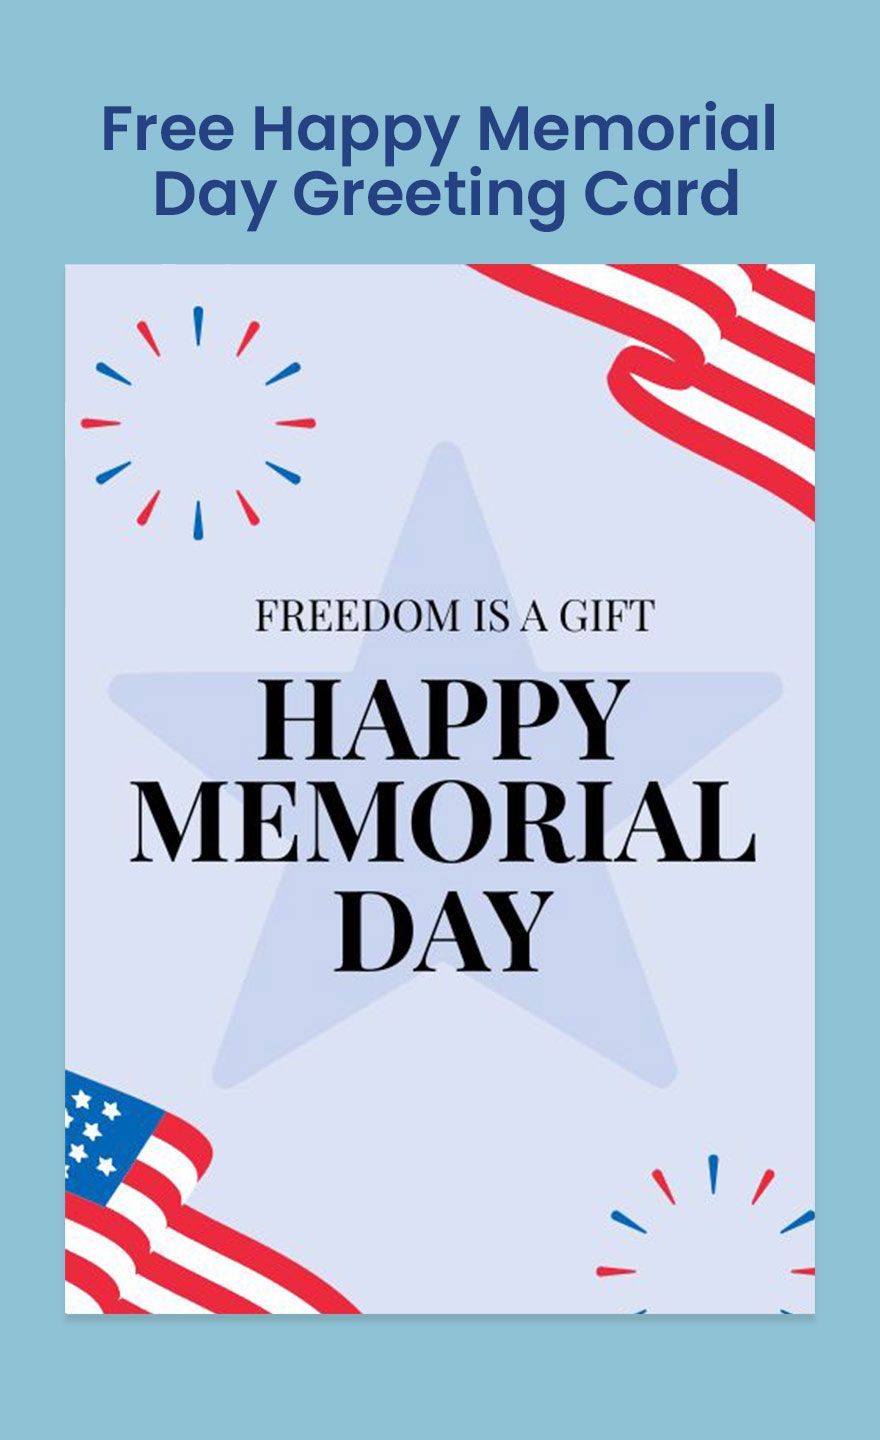 Free Happy Memorial Day Greeting Card